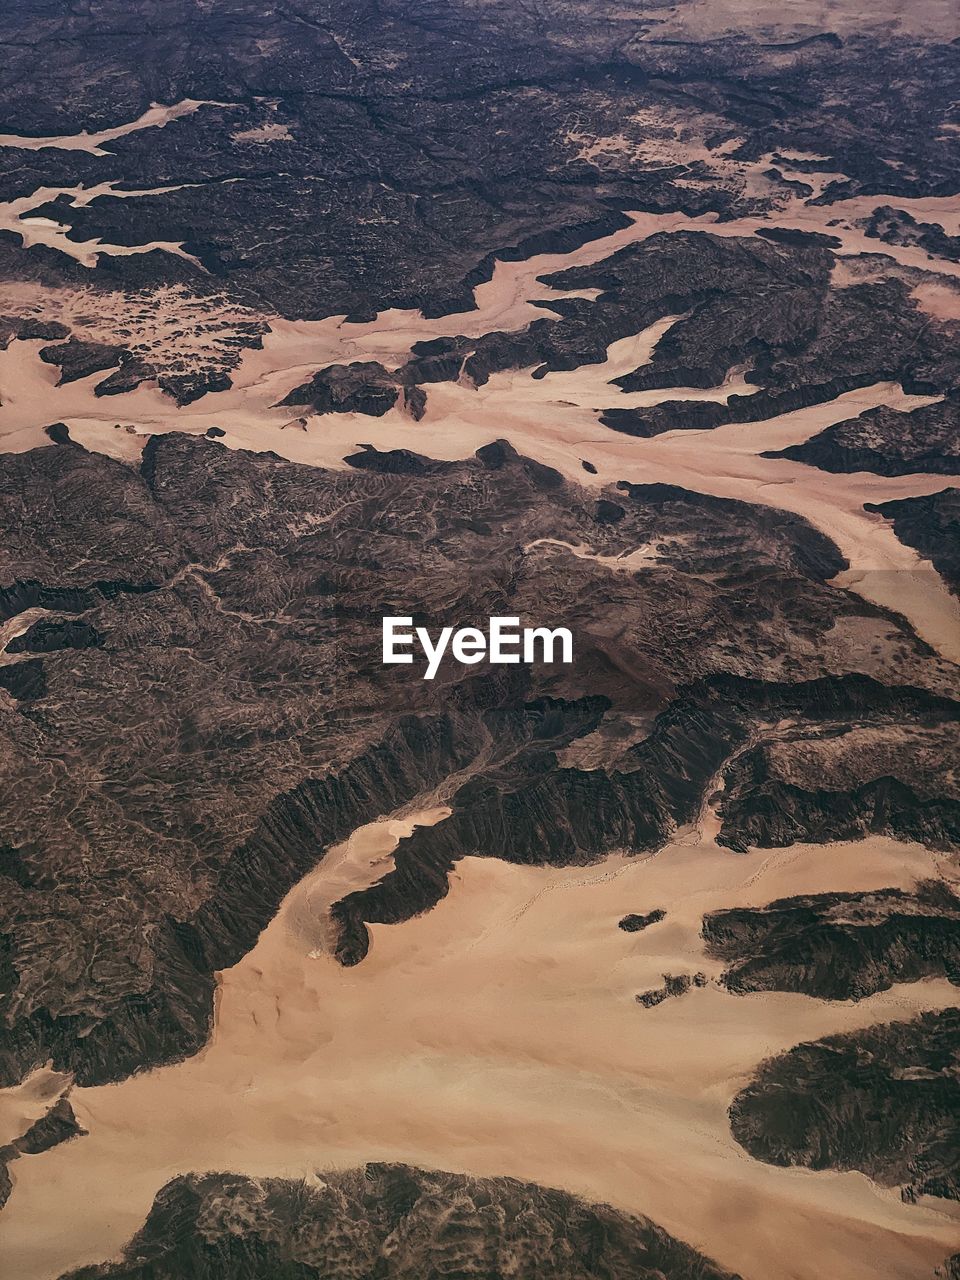 Dry riverbeds, canyons and desert in saudi arabia taken from an aircraft.